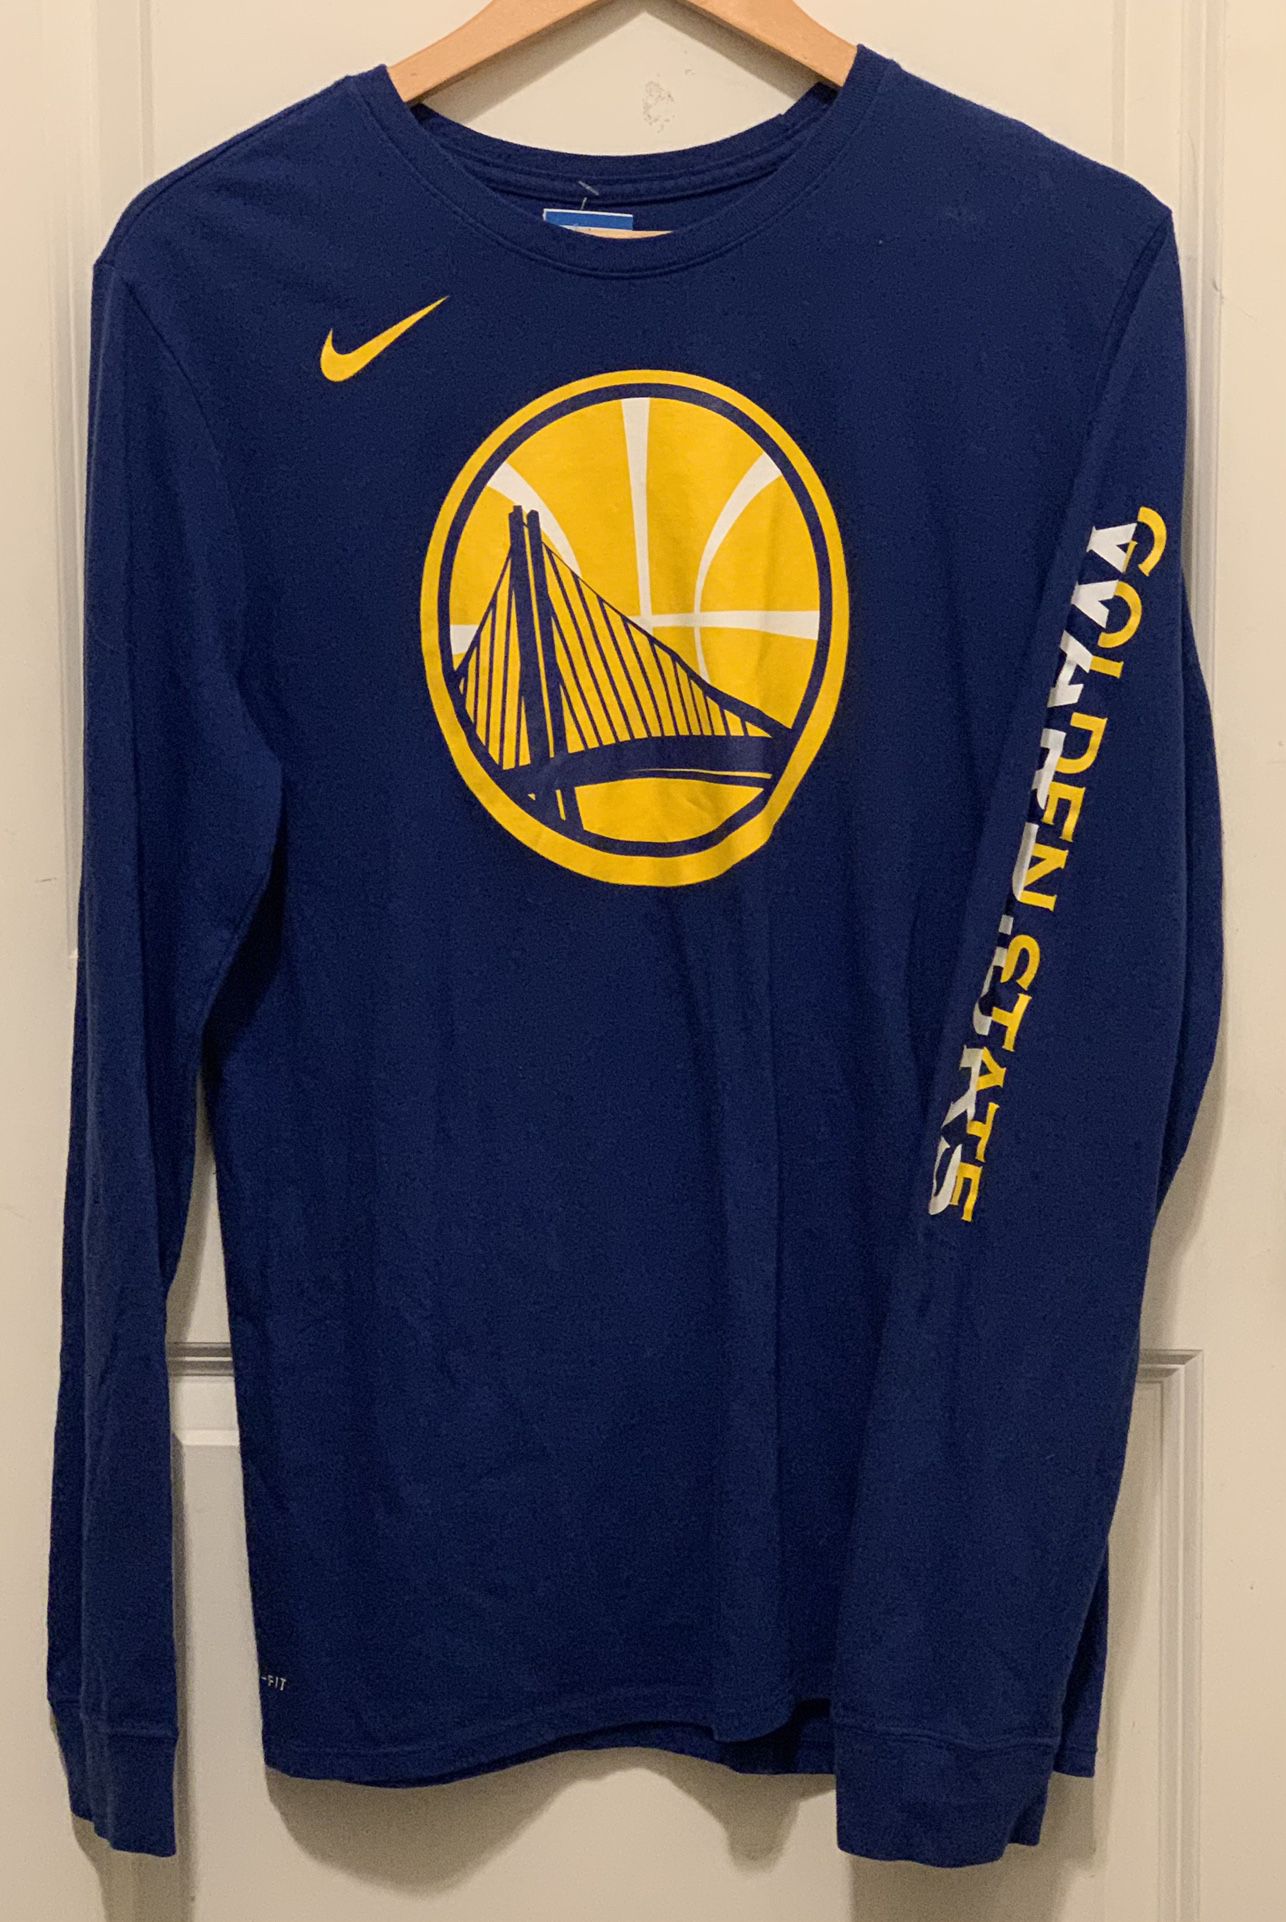 Nike Golden State Warrior The Tee Shirt Dri Fit Size Large Gently Used